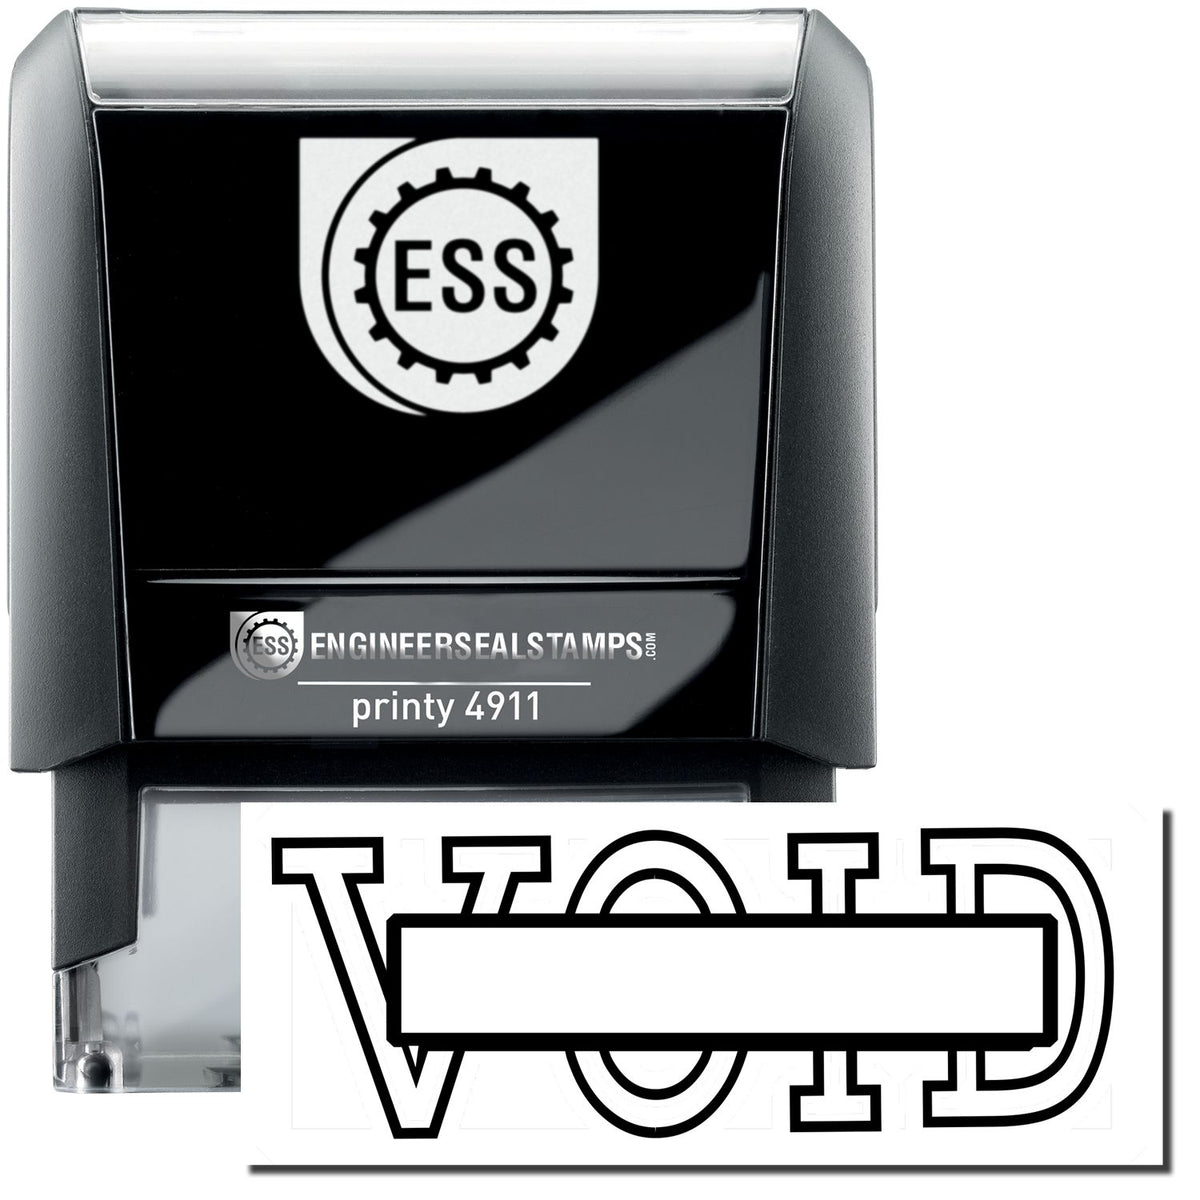 A self-inking stamp with a stamped image showing how the text &quot;VOID&quot; in an outline style with a box in the center of the text is displayed after stamping.